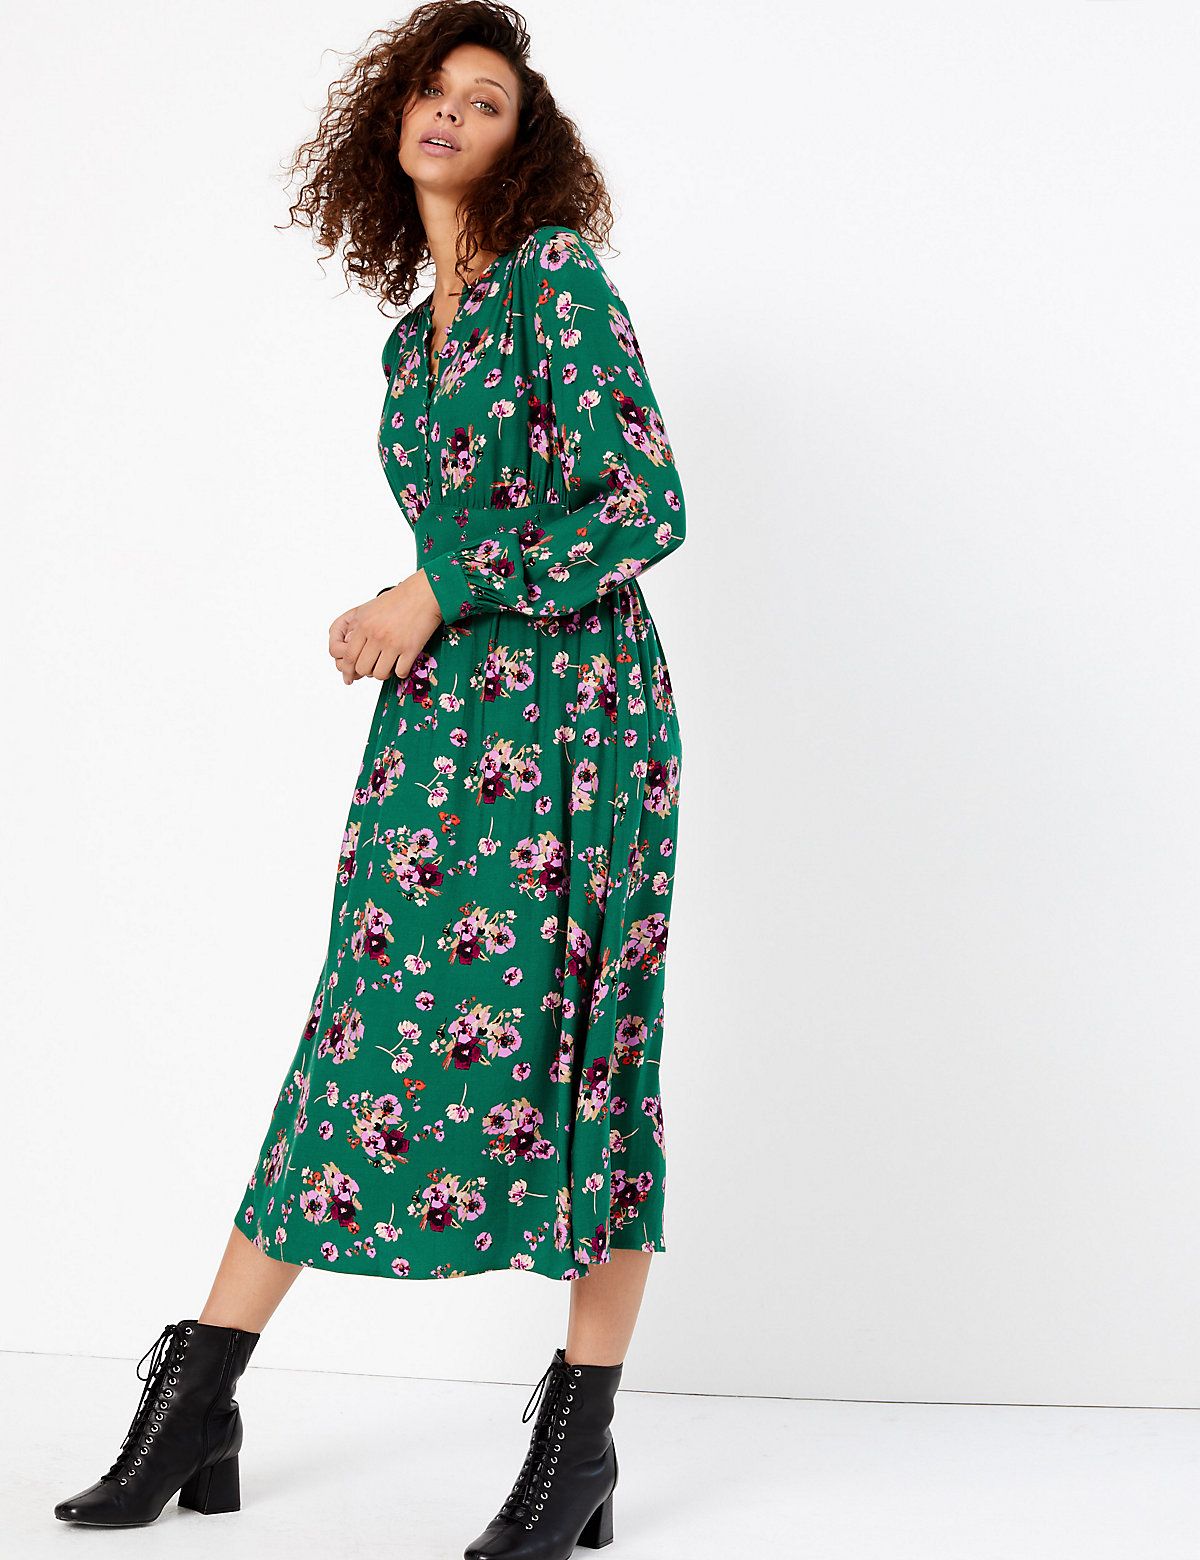 m and s floral midi dress